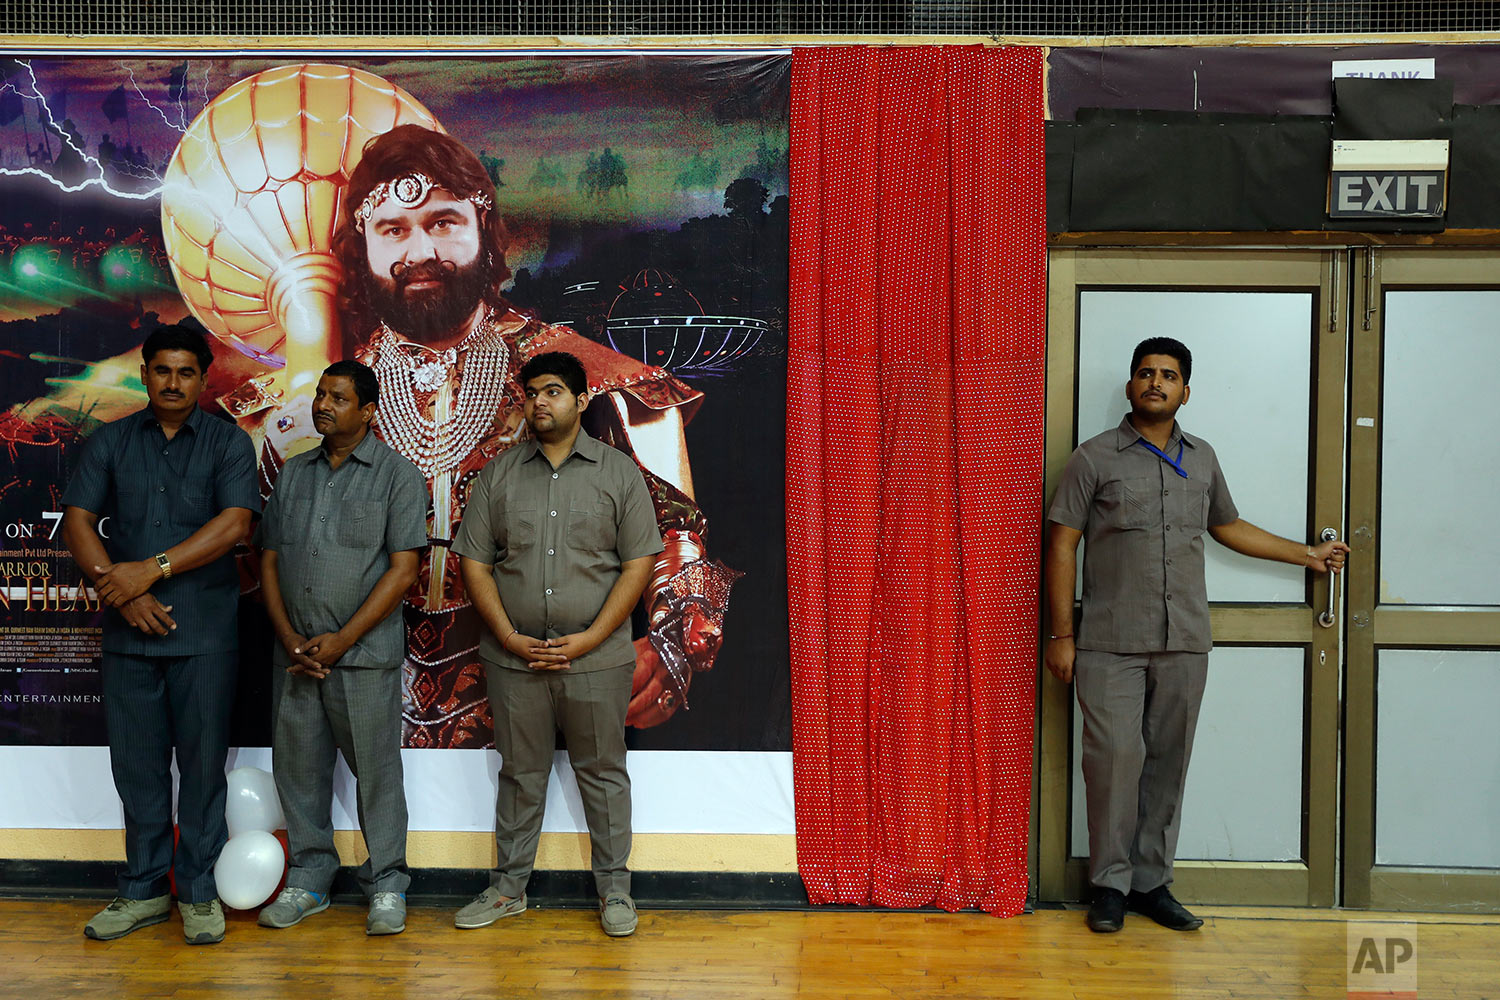  In this Oct. 5, 2016, file photo, security officers stand watch by a poster of Indian spiritual guru, who calls himself Dr. Saint Gurmeet Singh Ram Rahim Insan, during a press conference ahead of the release of the guru's film "MSG, The Warrior Lion